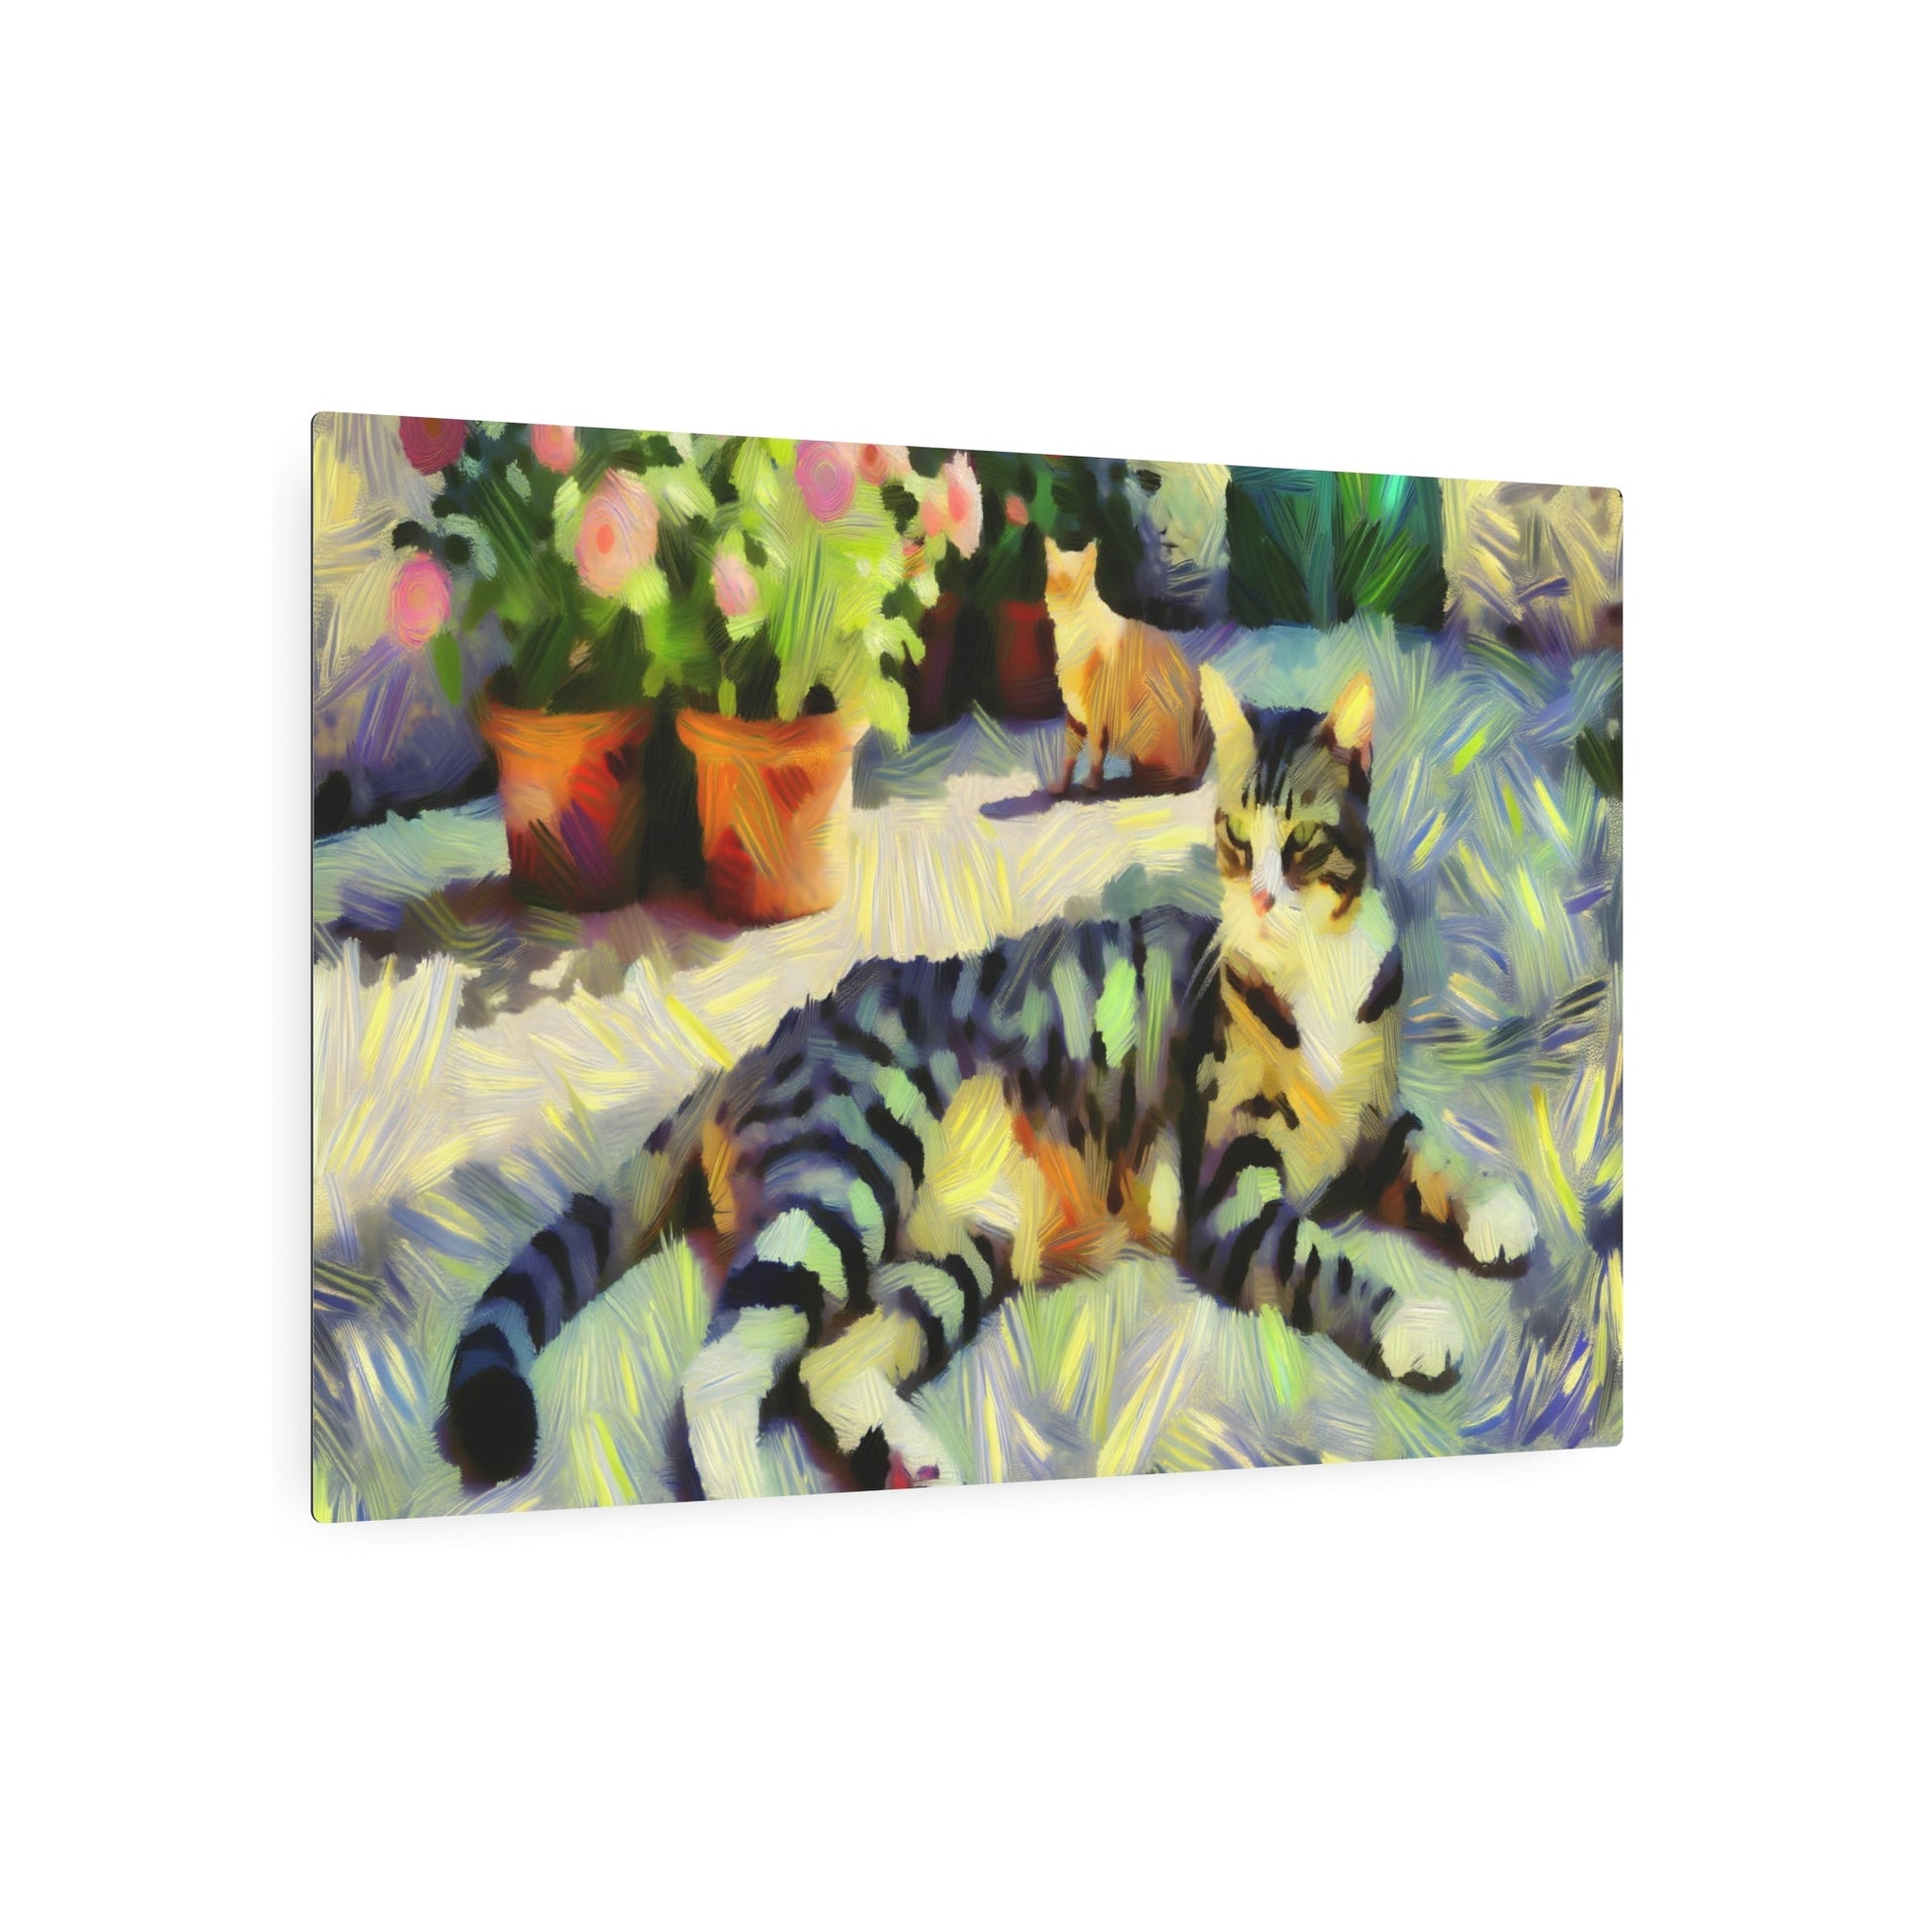 Metal Poster Art | "Impressionistic Western Art Styles - Beautifully Rendered Cat in Impressionism" - Metal Poster Art 36″ x 24″ (Horizontal) 0.12''